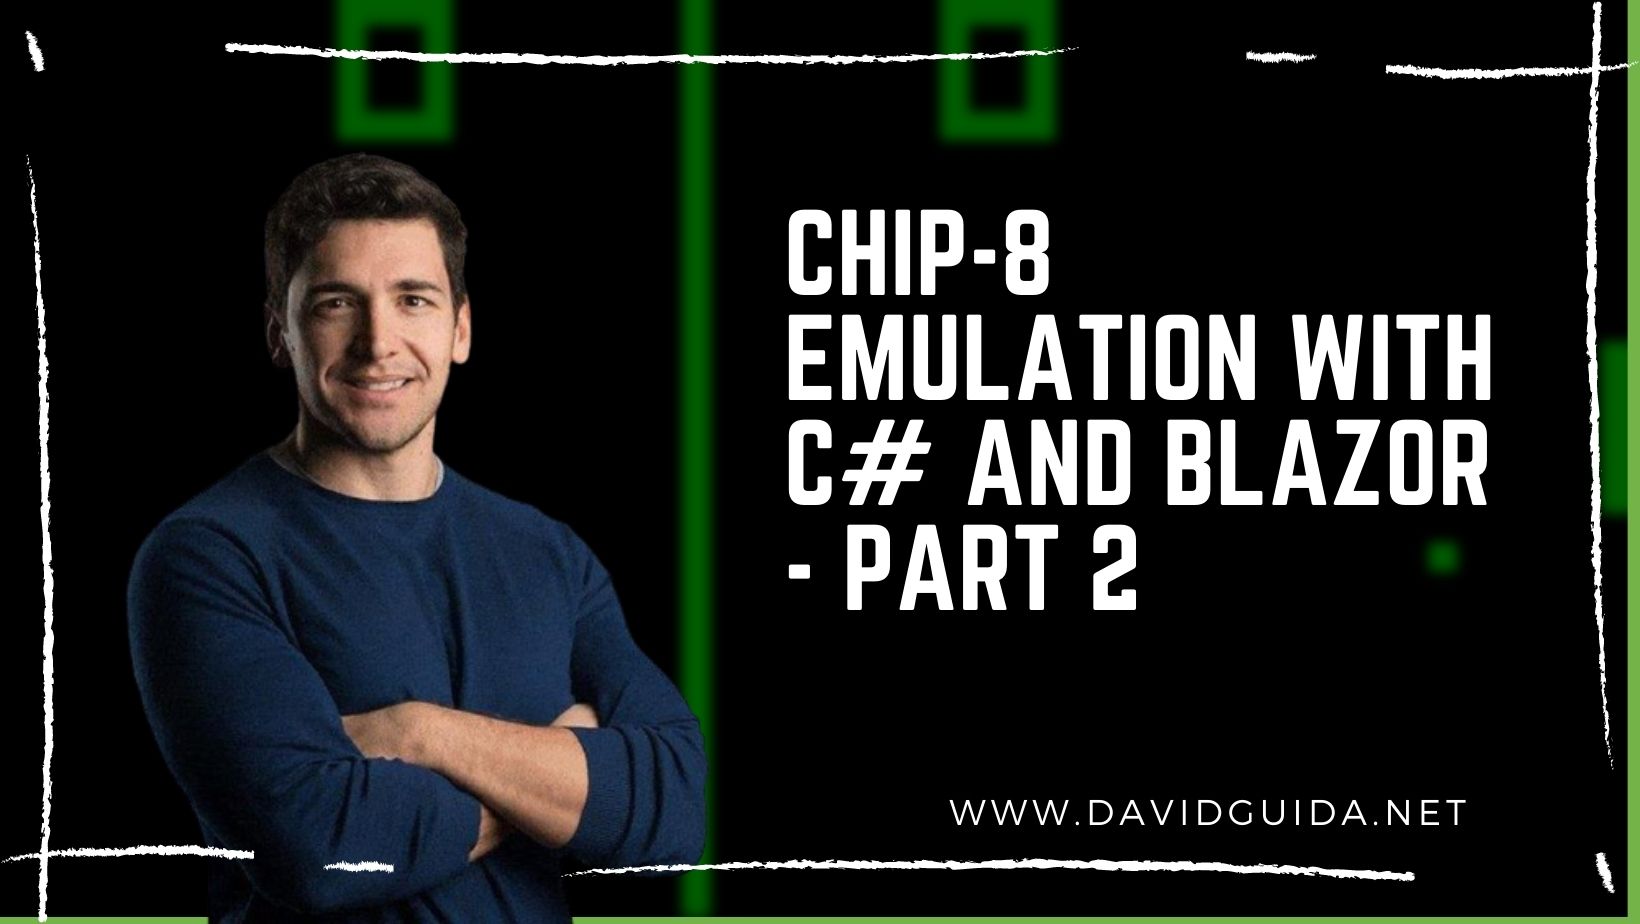 CHIP-8 emulation with C# and Blazor - part 2